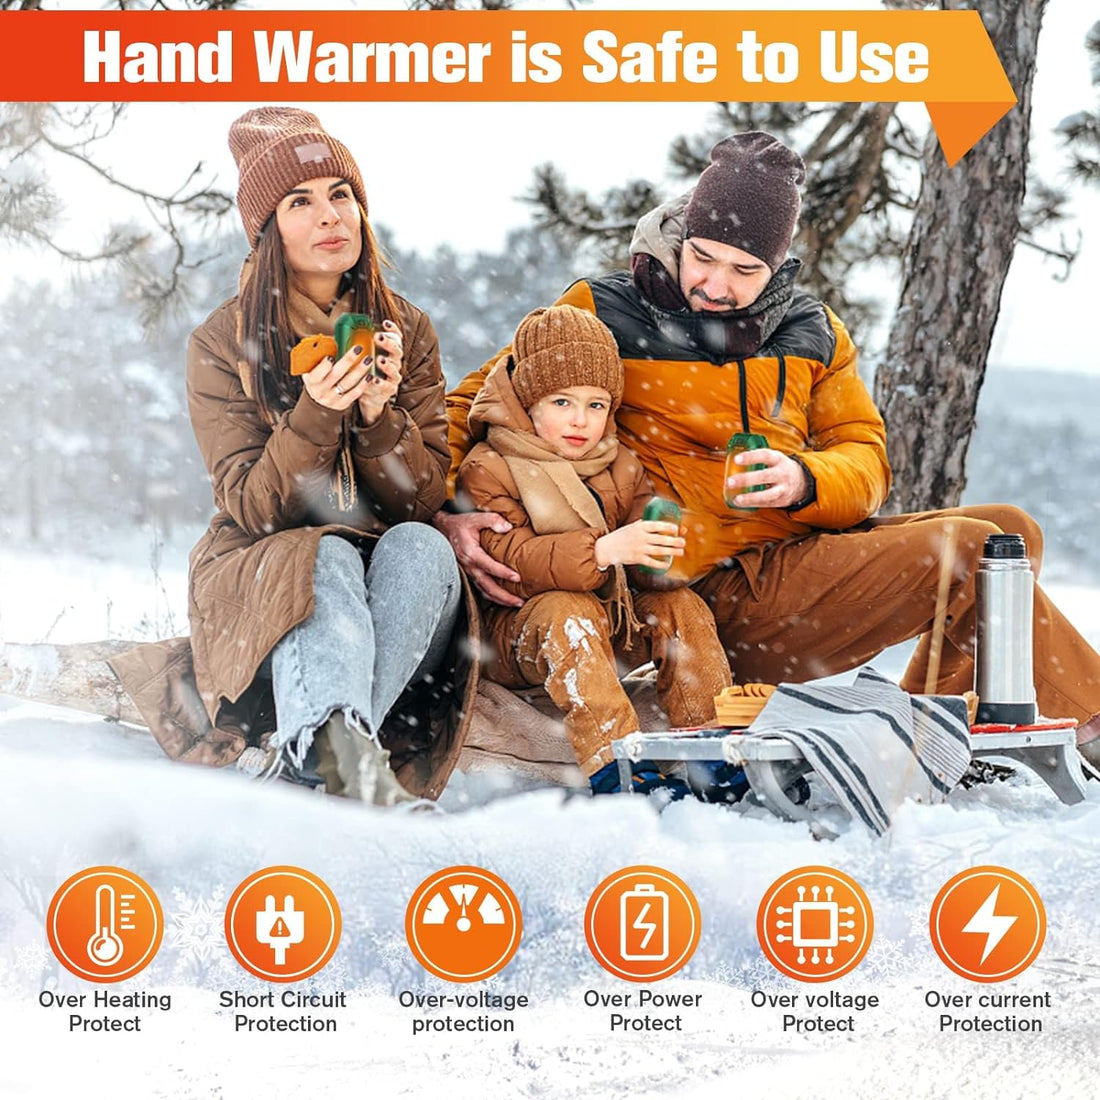 WARMHAND Hand Warmers Rechargeable 2 Pack, Electric Hand Warmers Reusable, Portable Hands Heater Winter Idea Gift for Women and Men, Indoor Outdoor Camping, Fishing, Cycling, Skiing, Massage, Hunting